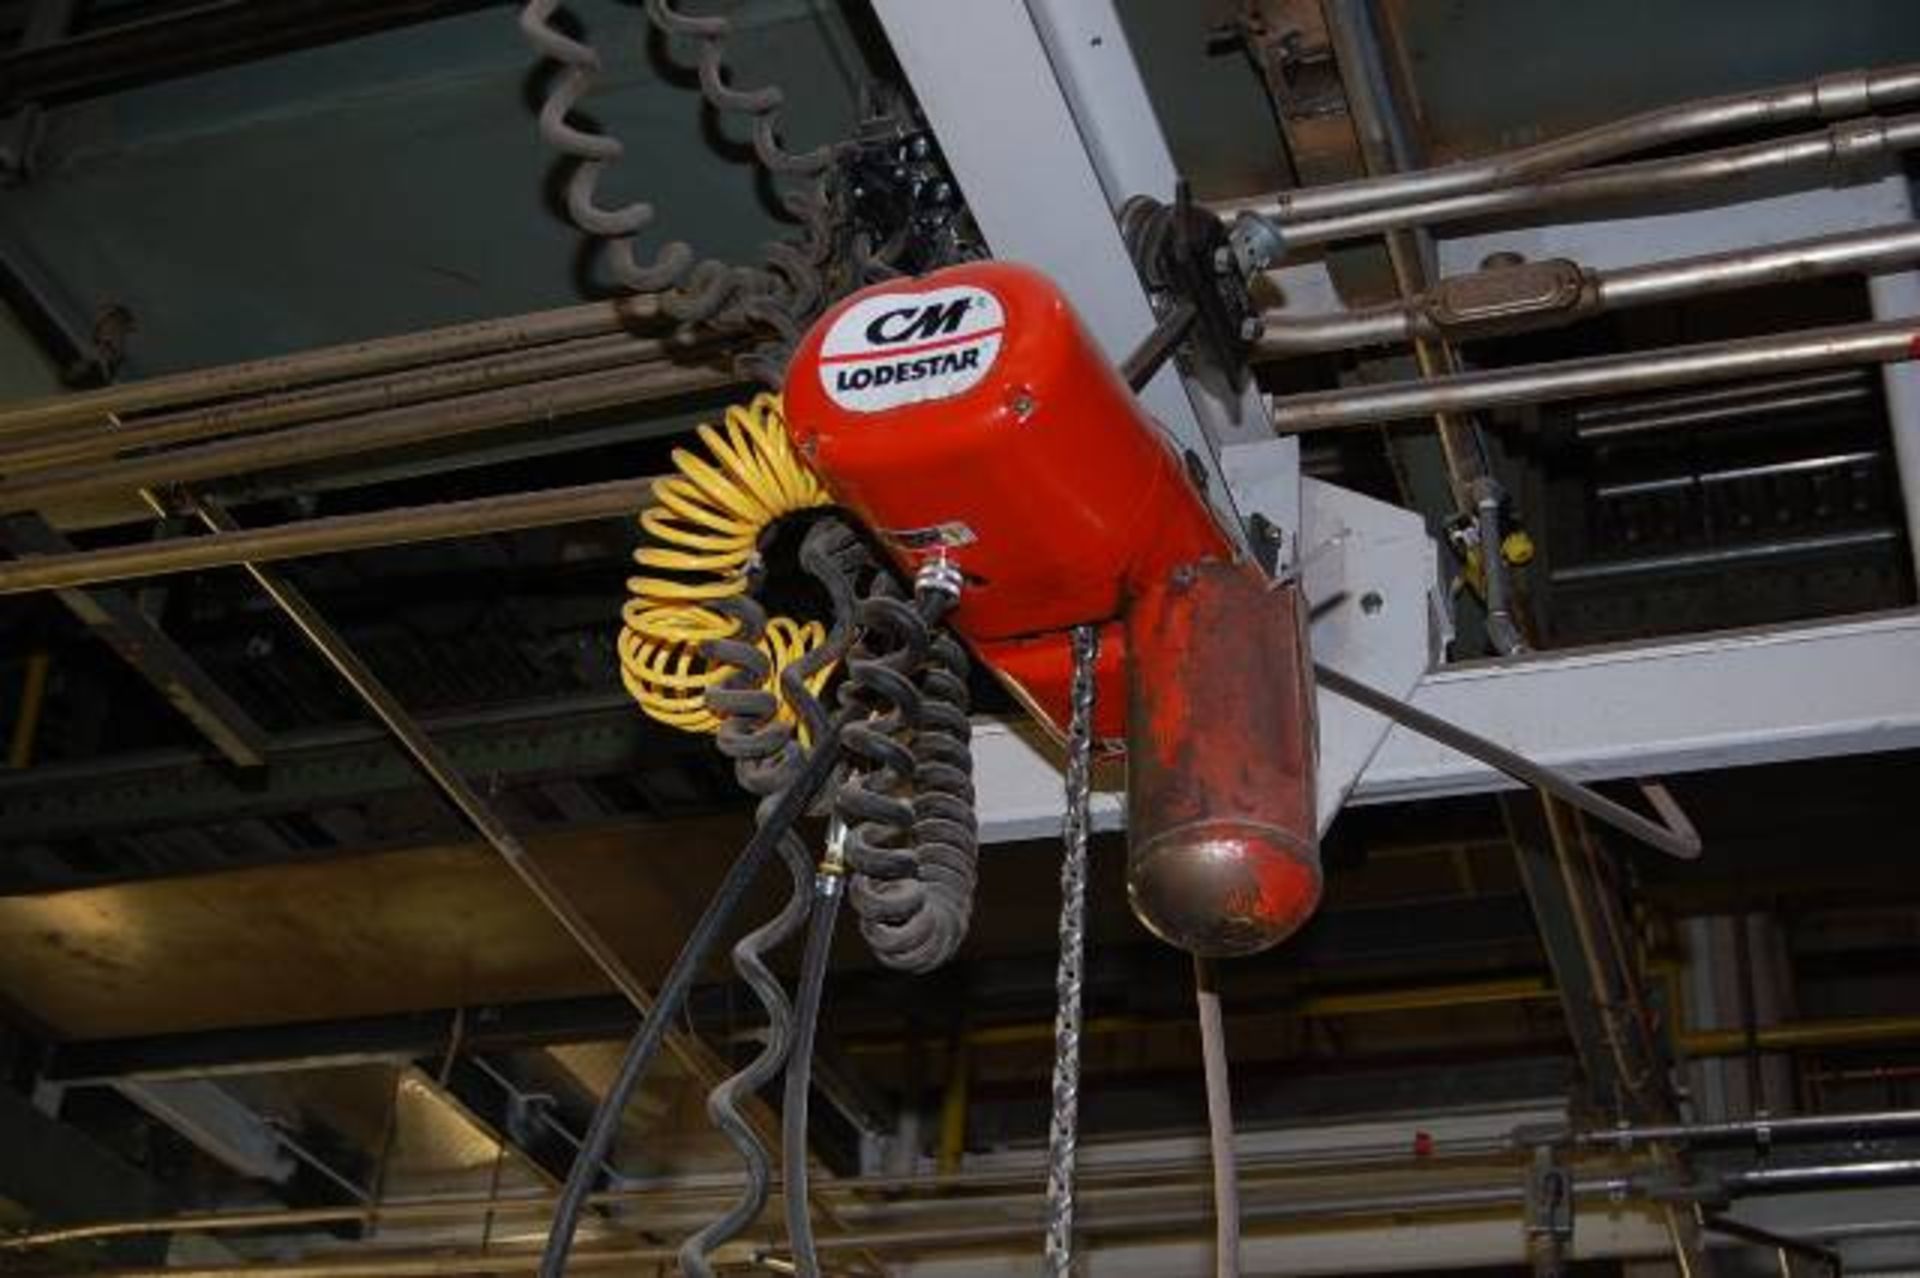 CM Loadstar Electric Chain Hoist, Includes LSI Model #4494/76-2A Lift Accessory - Image 3 of 3